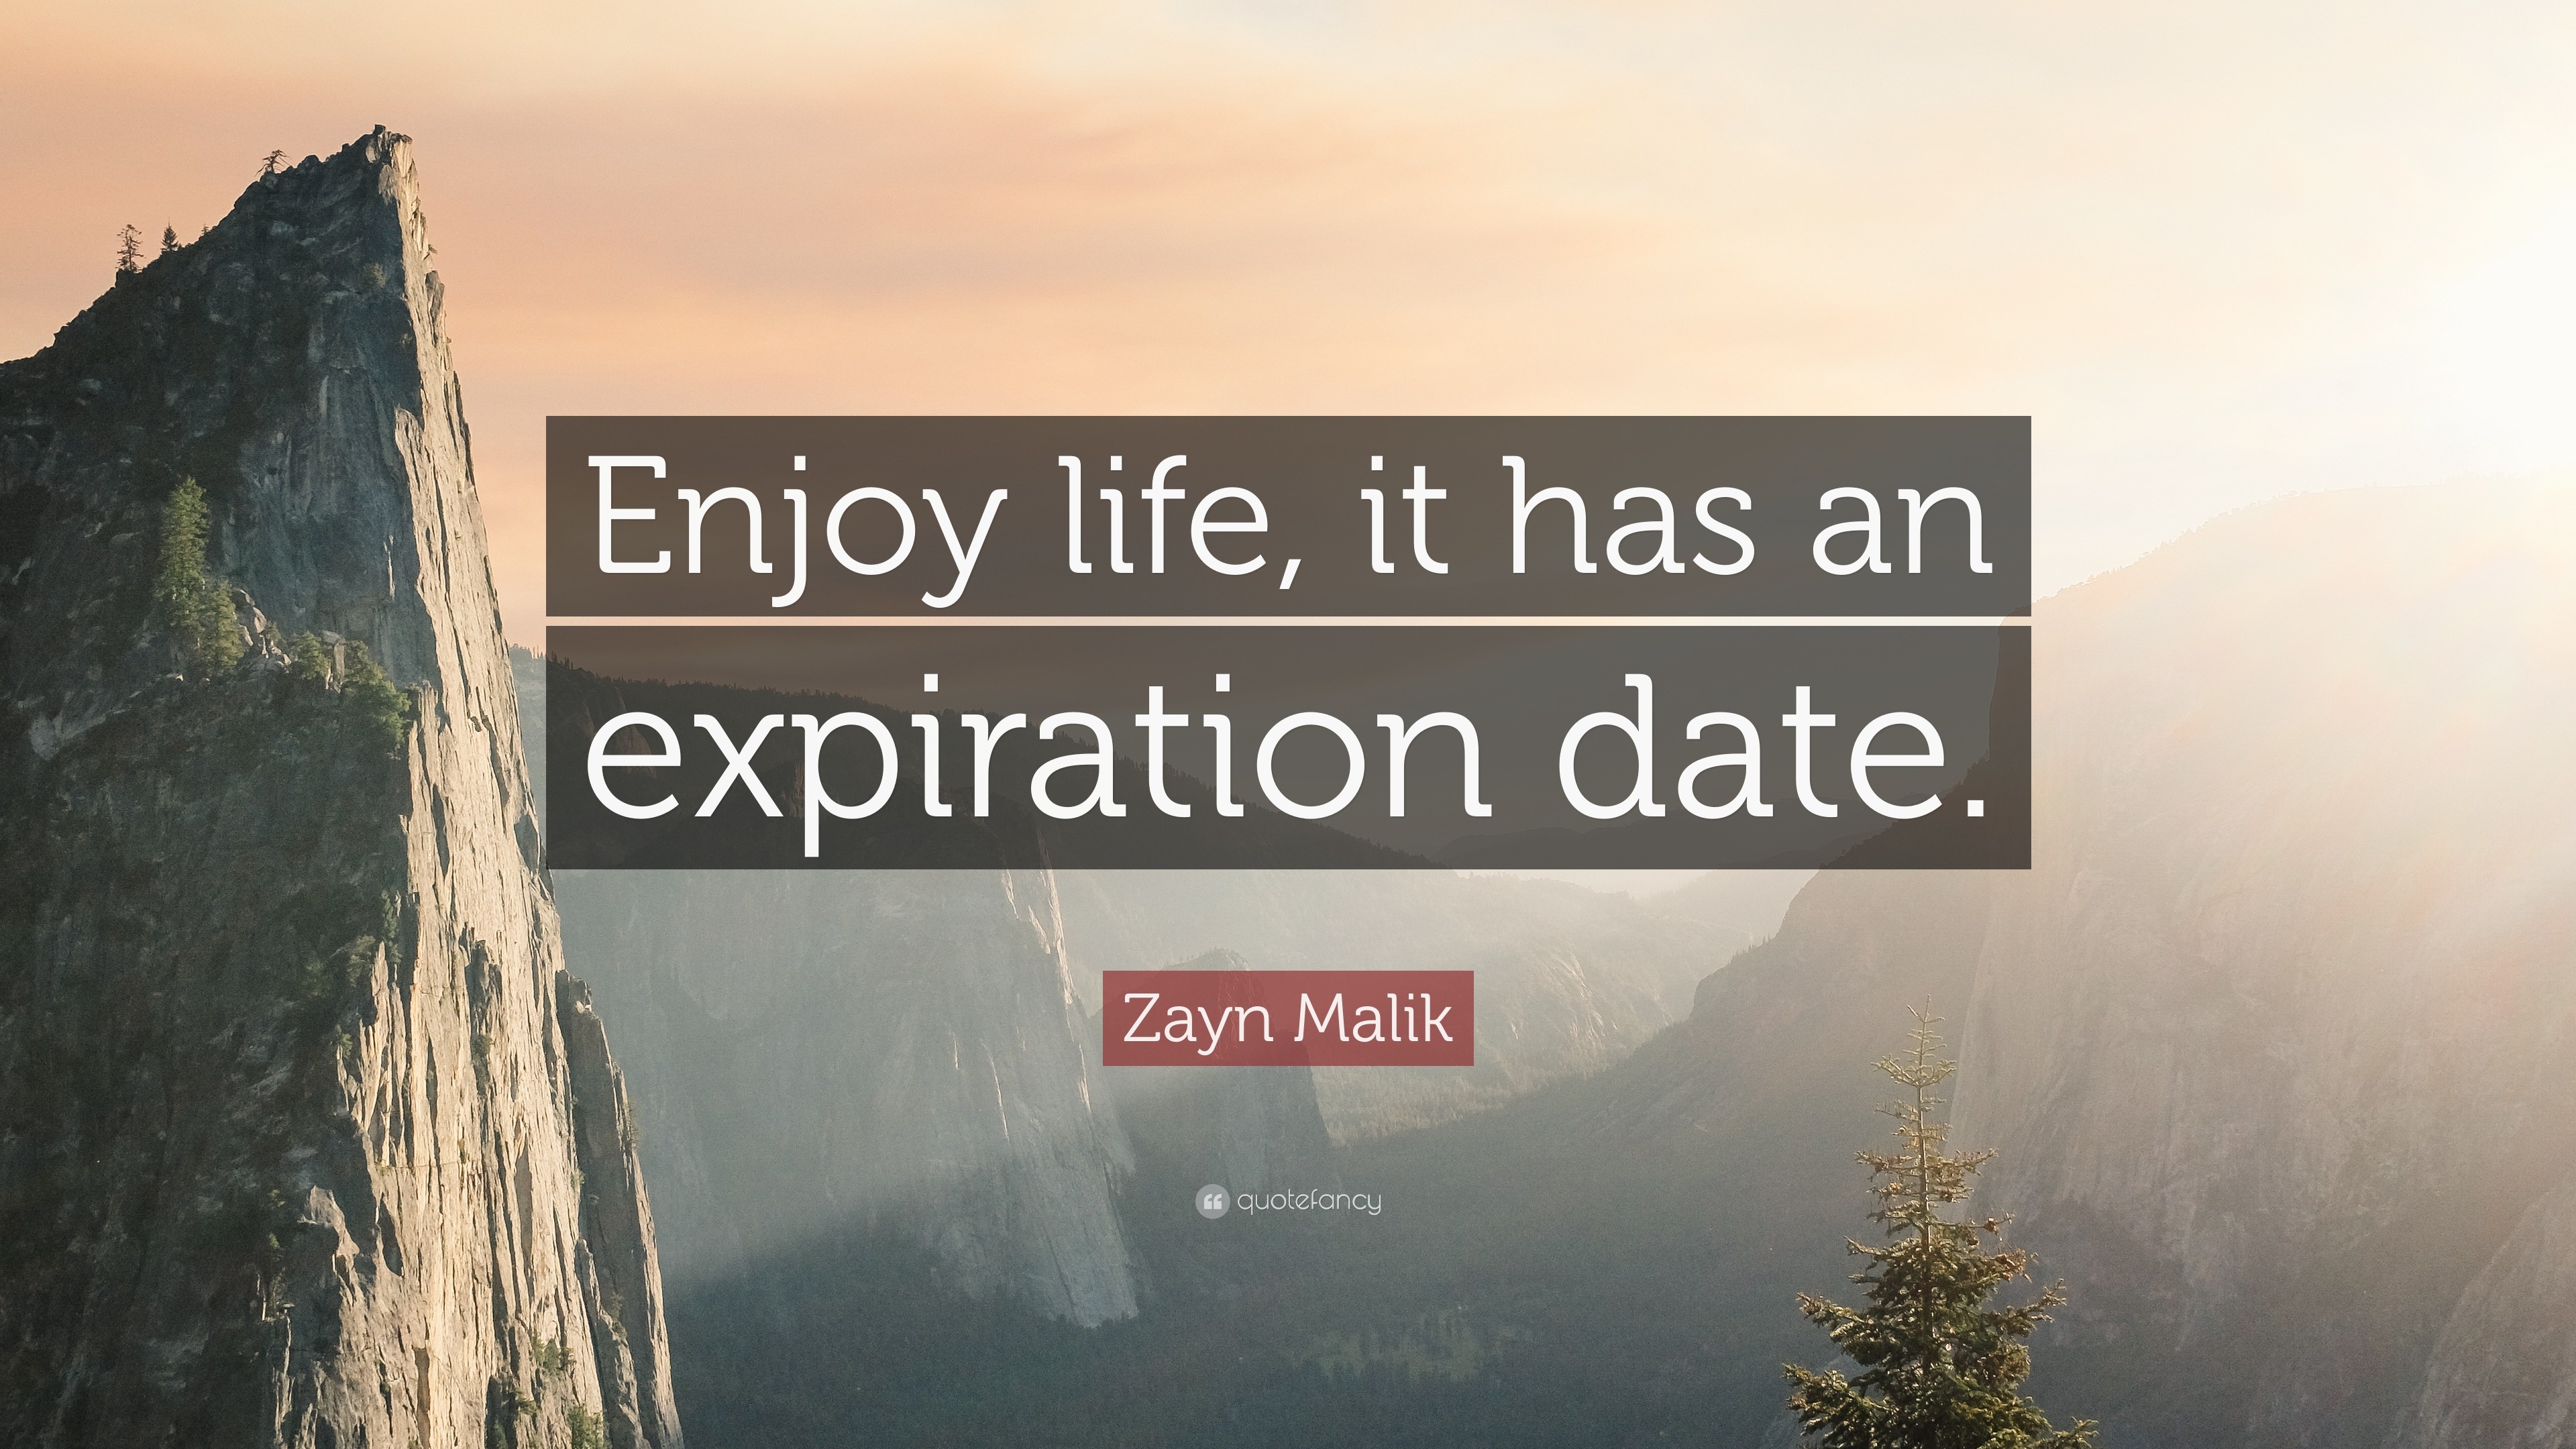 15 Enjoy Life and Nature Quotes | Inspiring Famous Quotes about Life